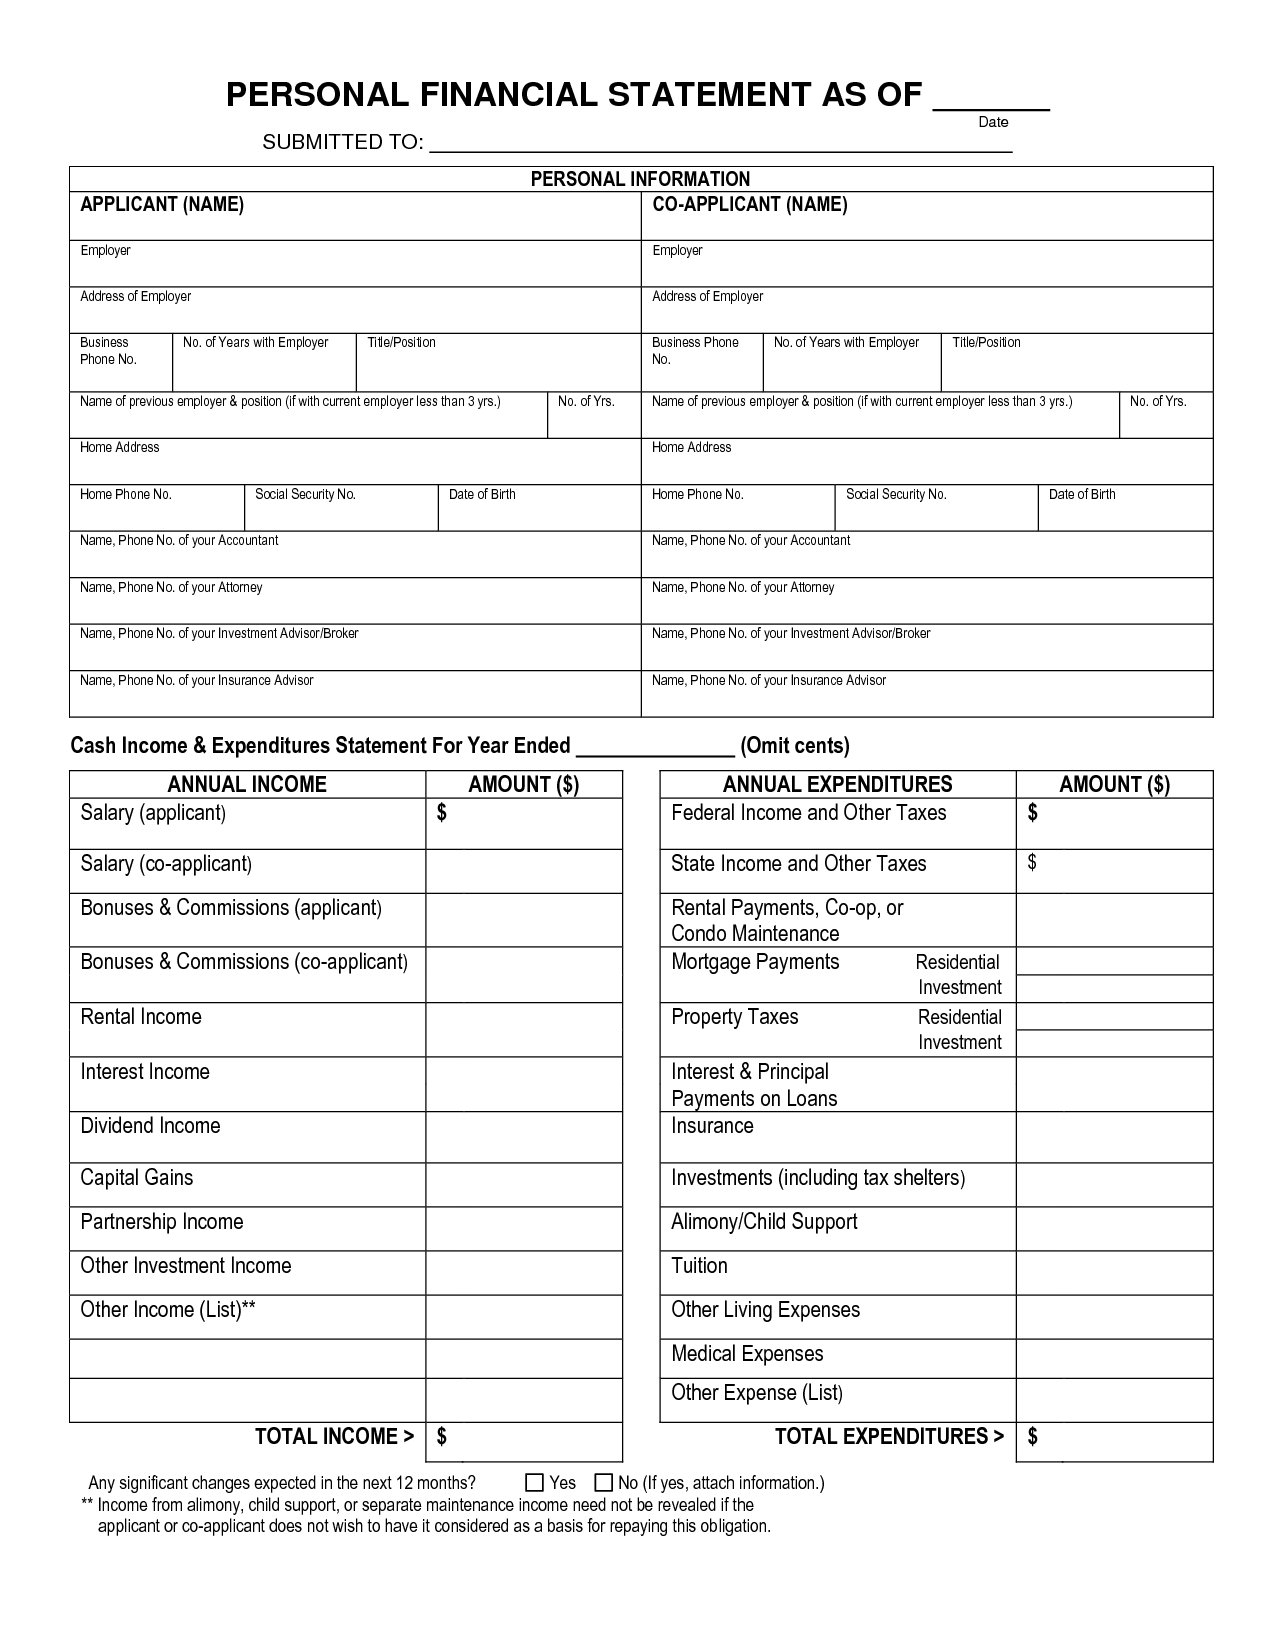 Free Printable Personal Financial Statement  Blank Personal pertaining to Blank Personal Financial Statement Template